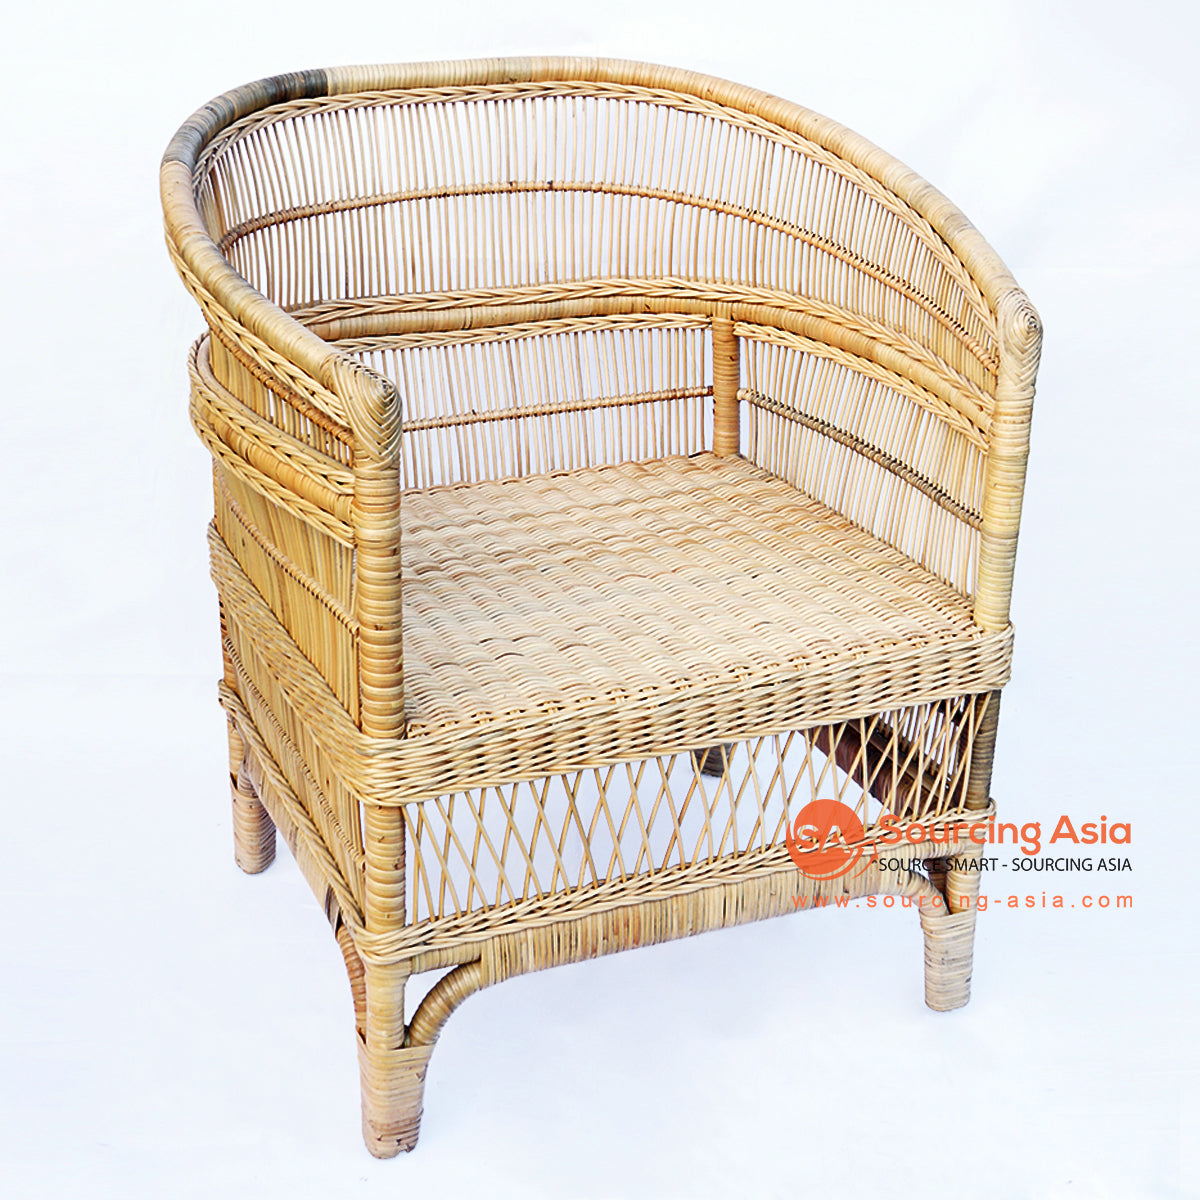 BNT070-3 NATURAL RATTAN AFRICAN STYLE MALAWI CHAIR